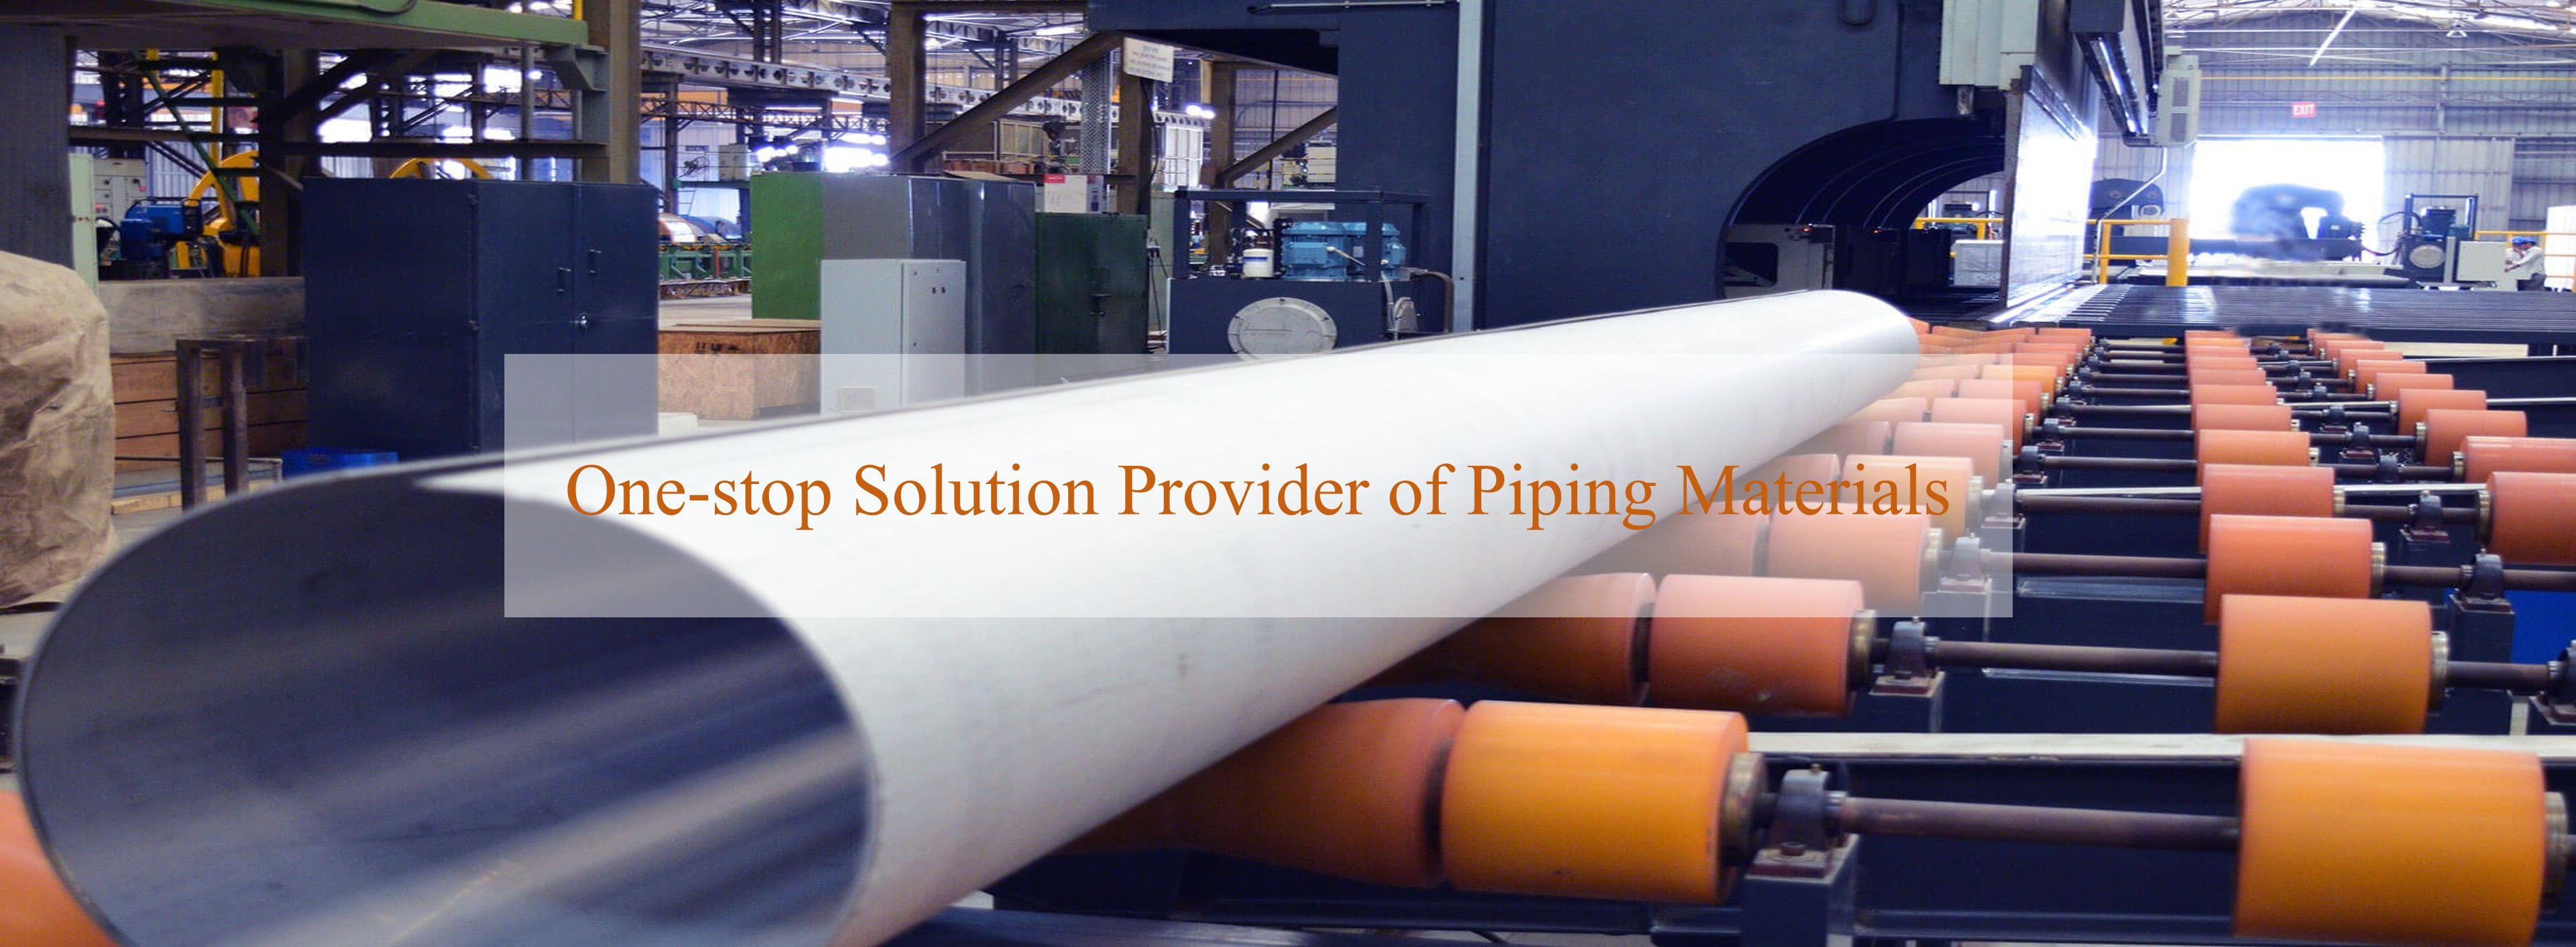 One-stop Solution Provider of Piping Materials